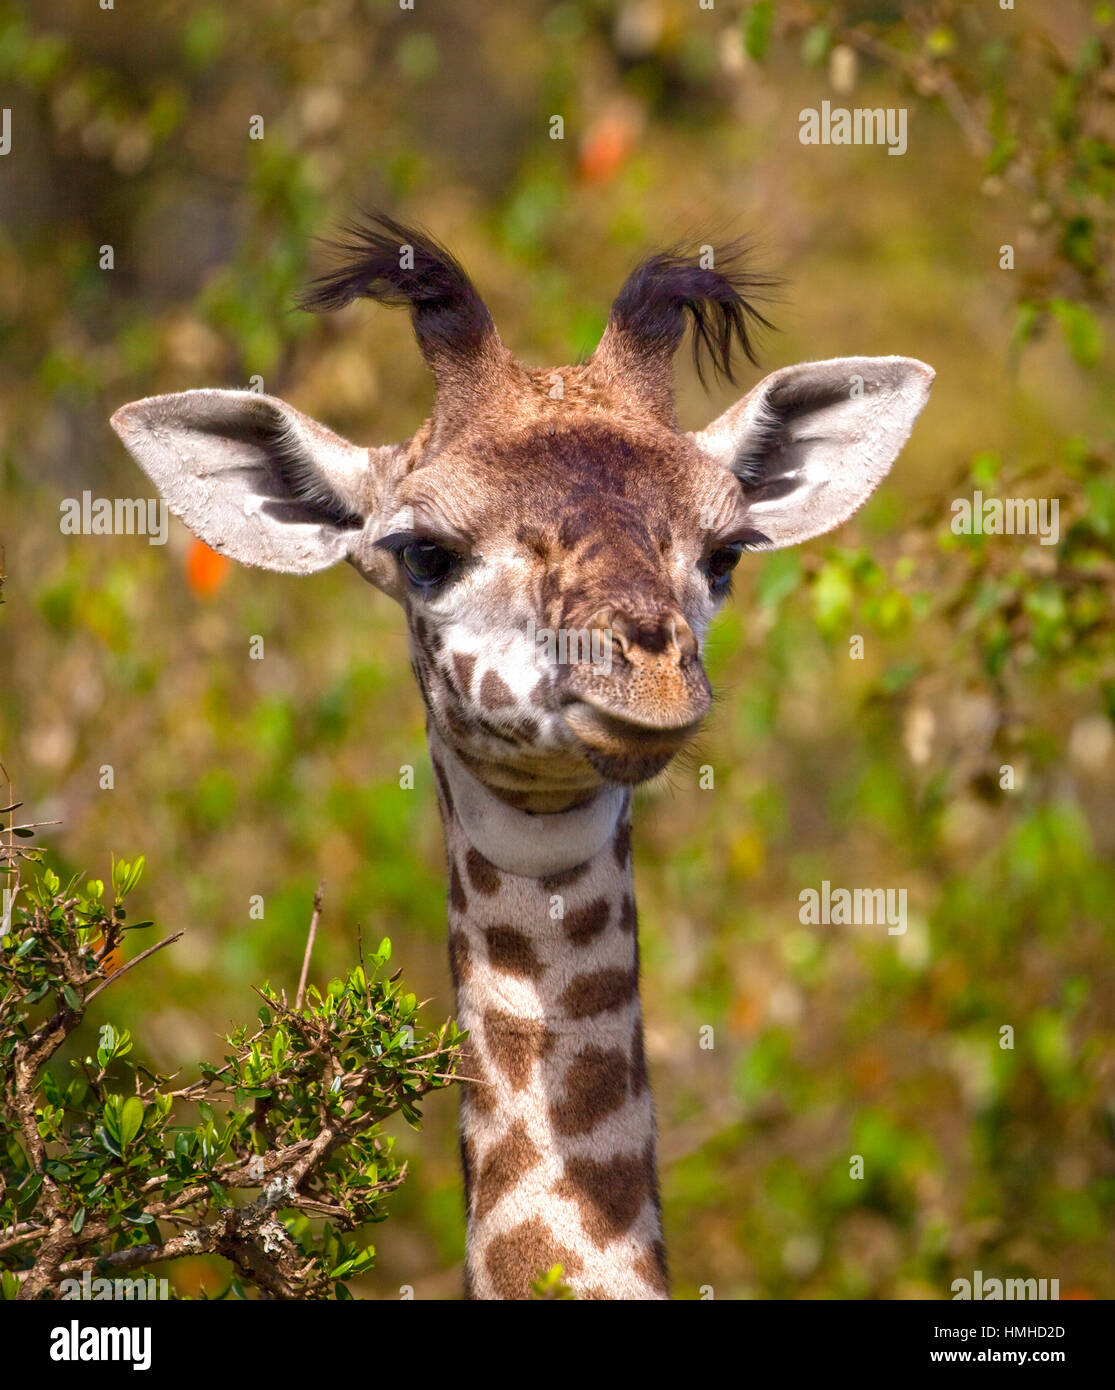 Adorable baby giraffe looking silly with foliage in background in Kenya Stock Photo